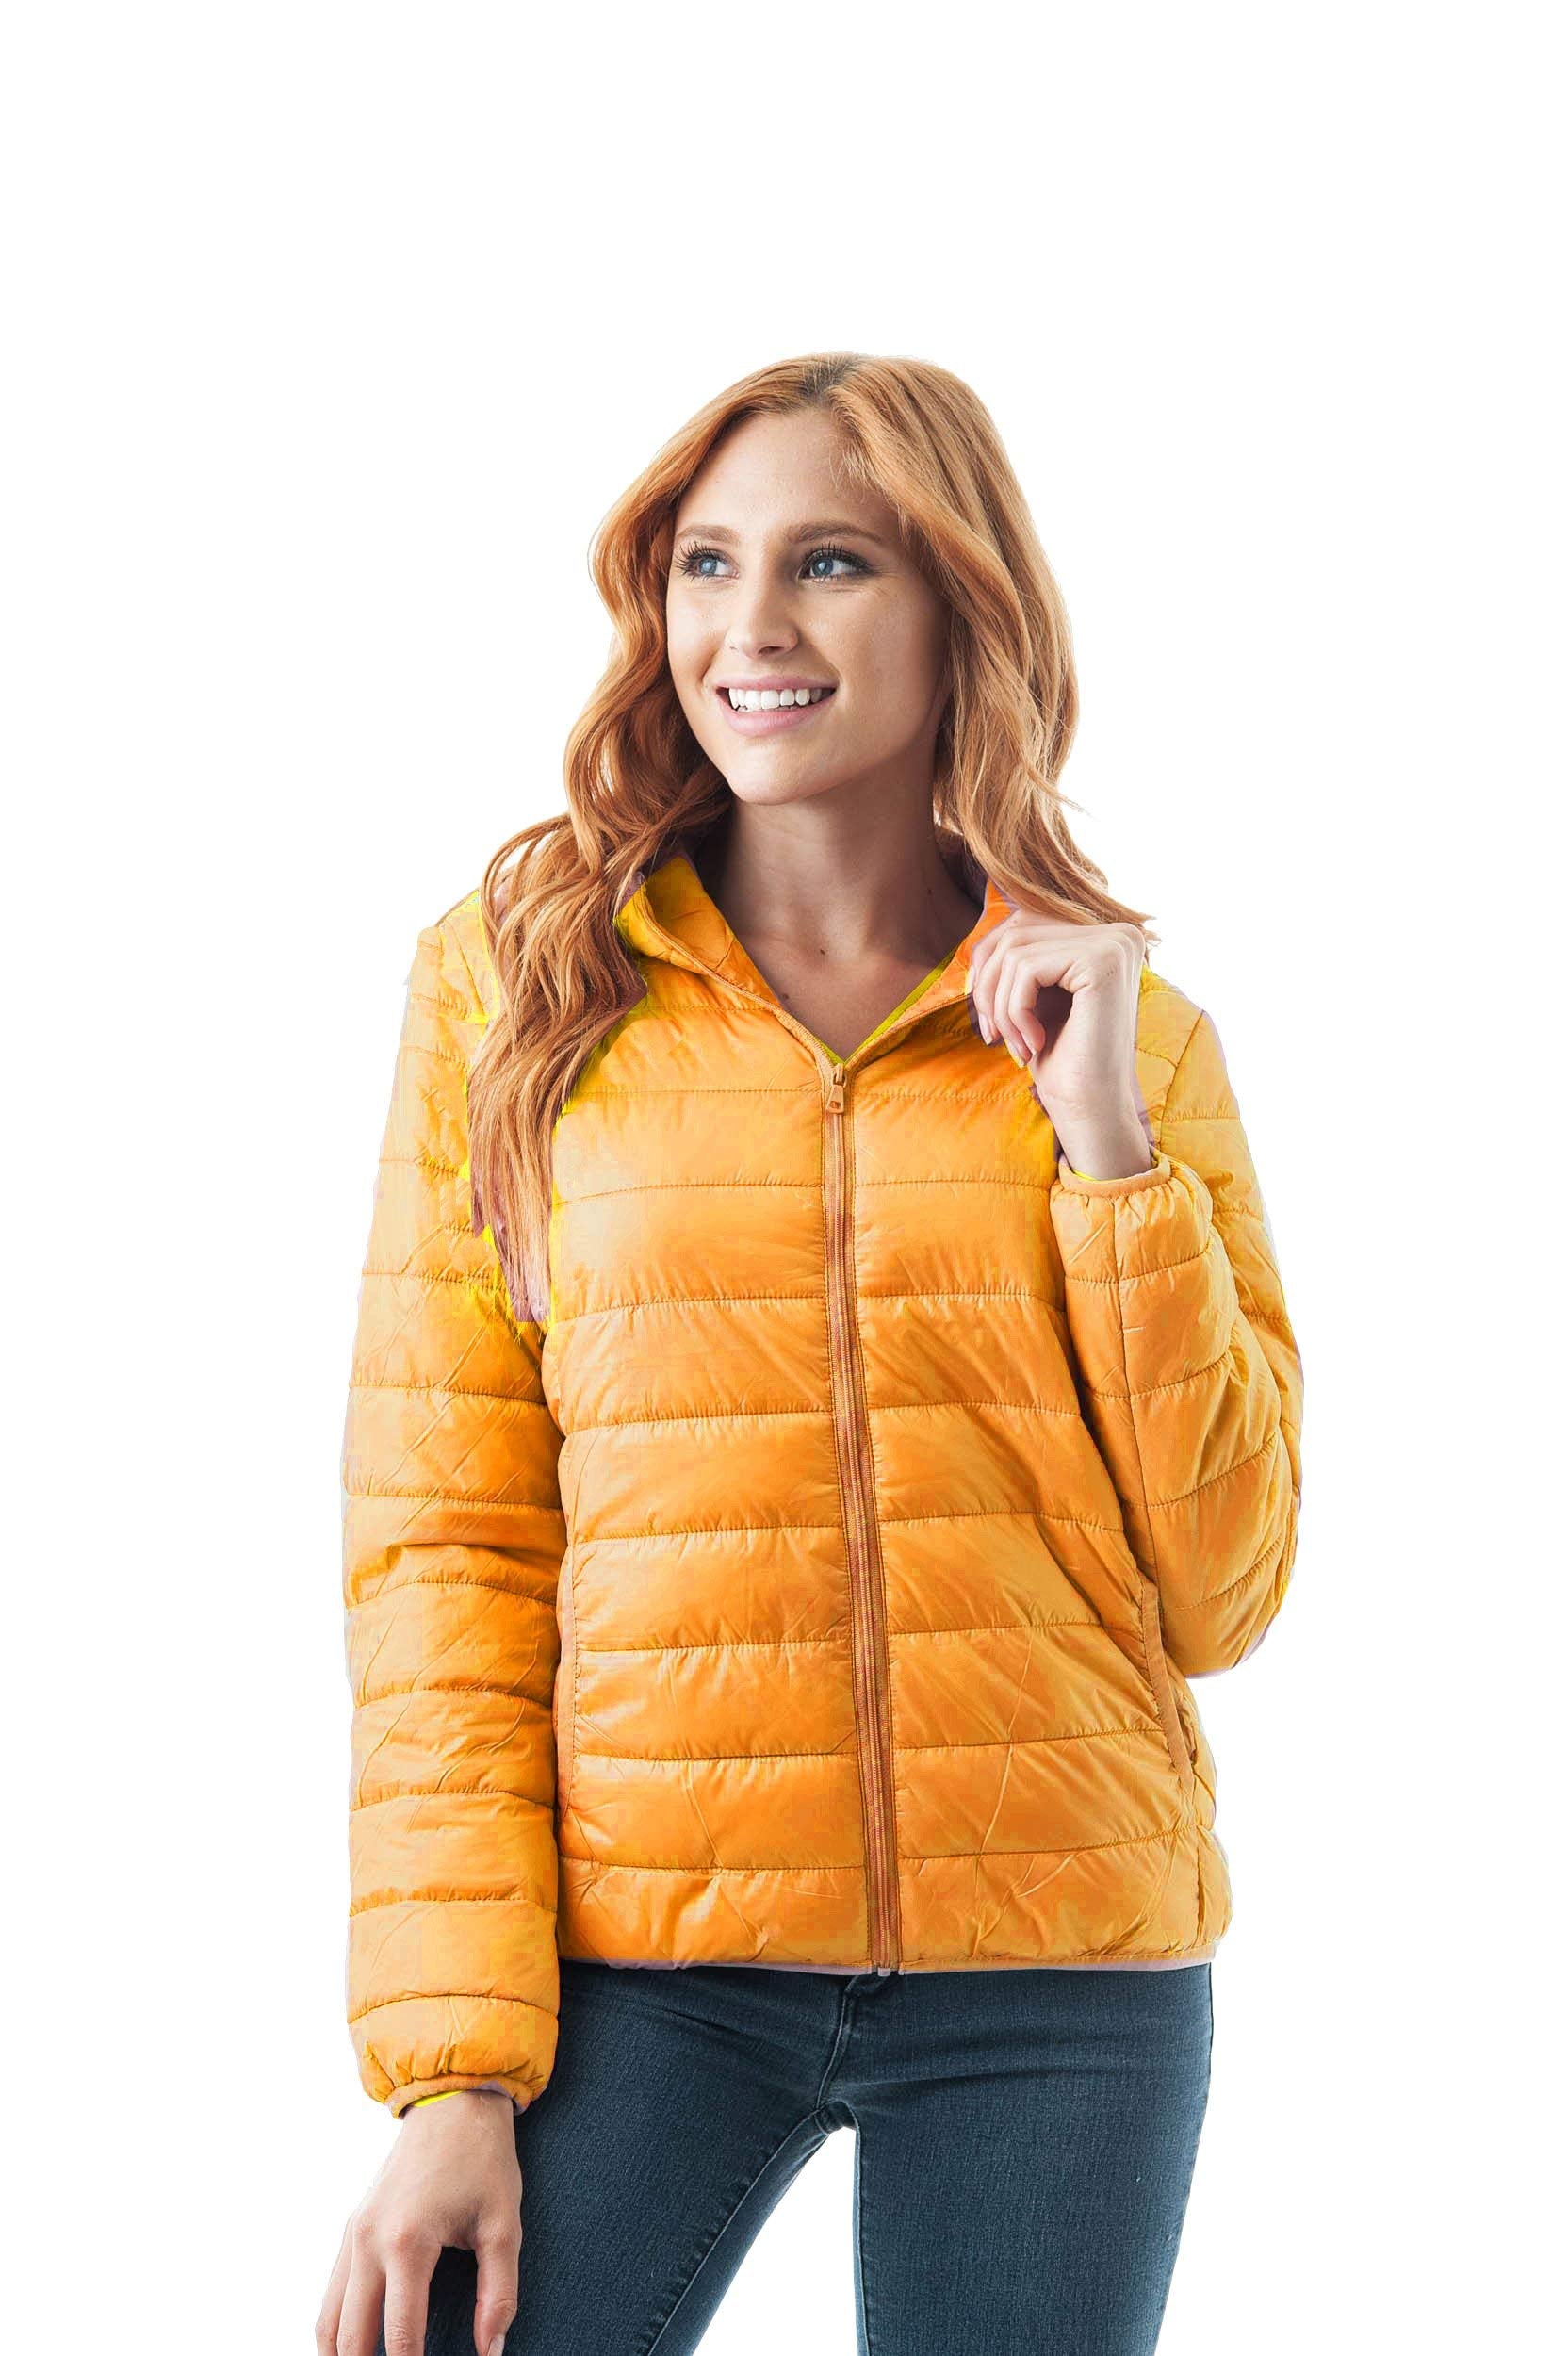 Khanomak Long Sleeve Light Weight Hooded Packable Down Jacket With Carry Bag